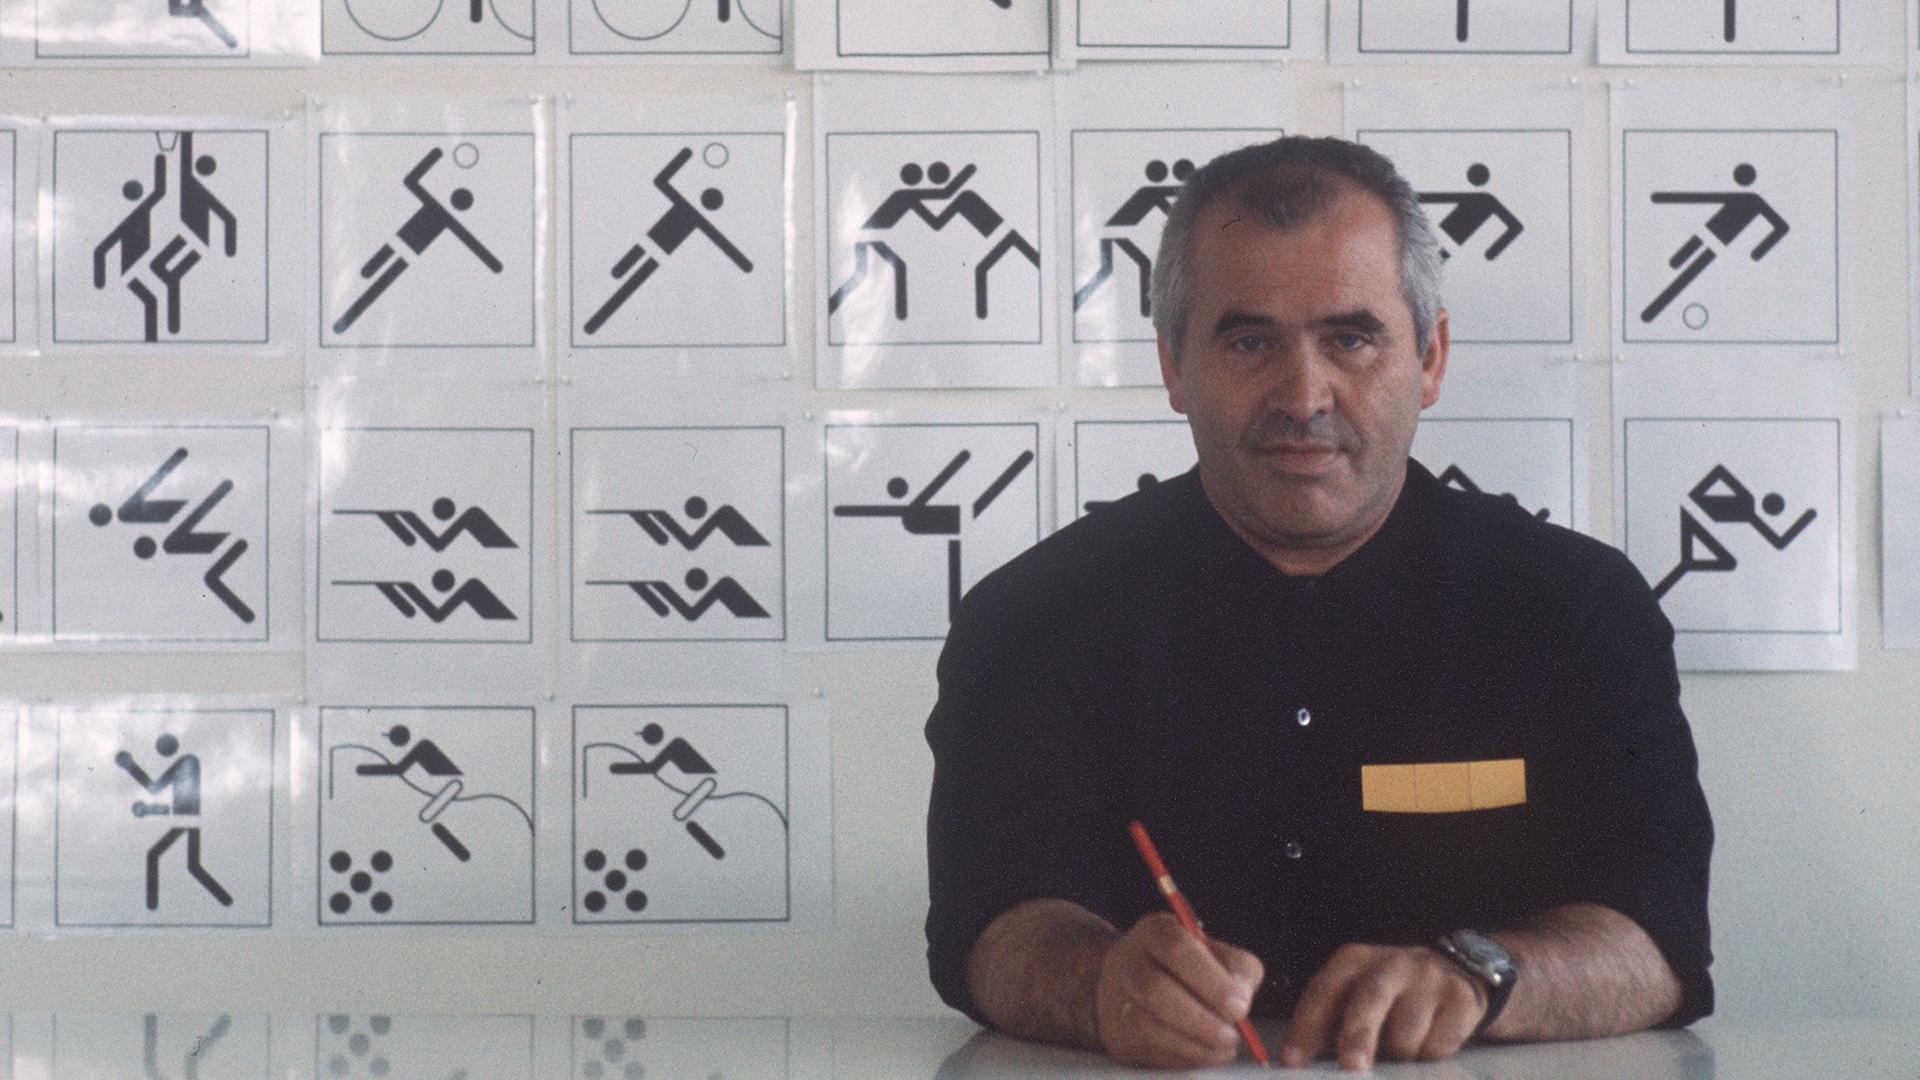 The graphic designer, designer, architect Otl Aicher (1922-1991) is sitting at his desk in 1970, in the background a blackboard with pictograms, symbols, signs, which he designed for sports at the 1972 Summer Olympics in Munich